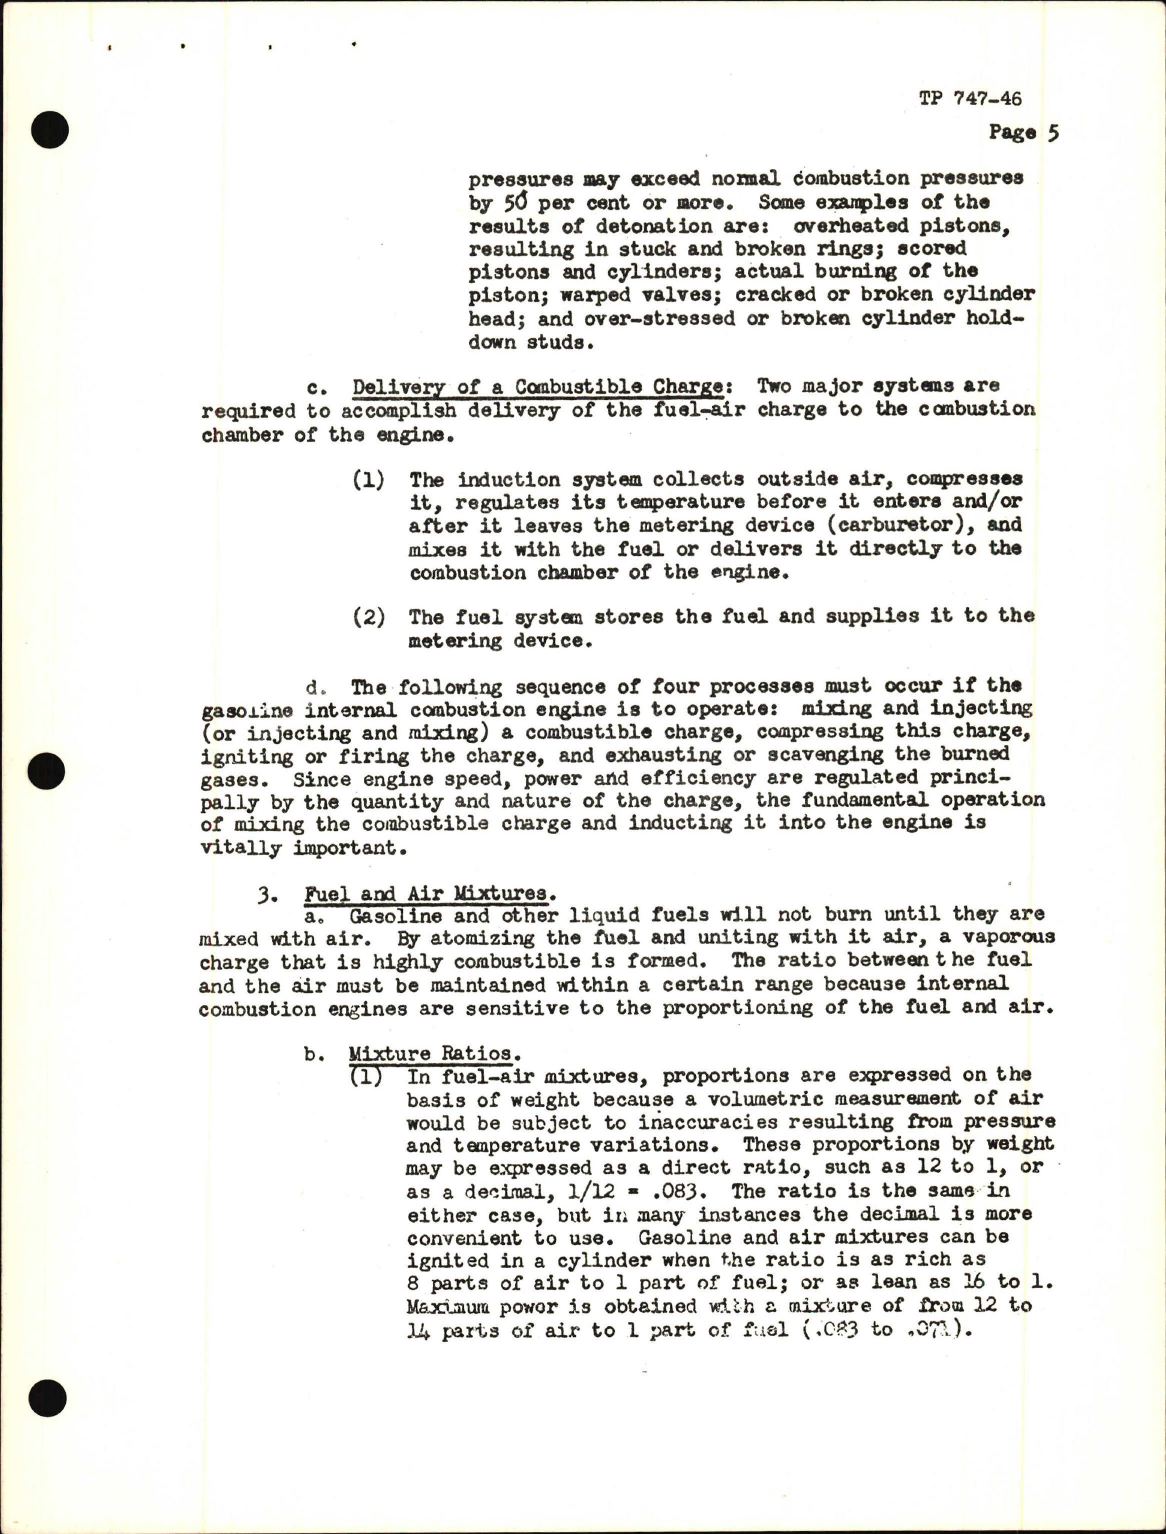 Sample page 5 from AirCorps Library document: Training Project, Inspection of Aircraft Fuel, Carburetion and Injection System